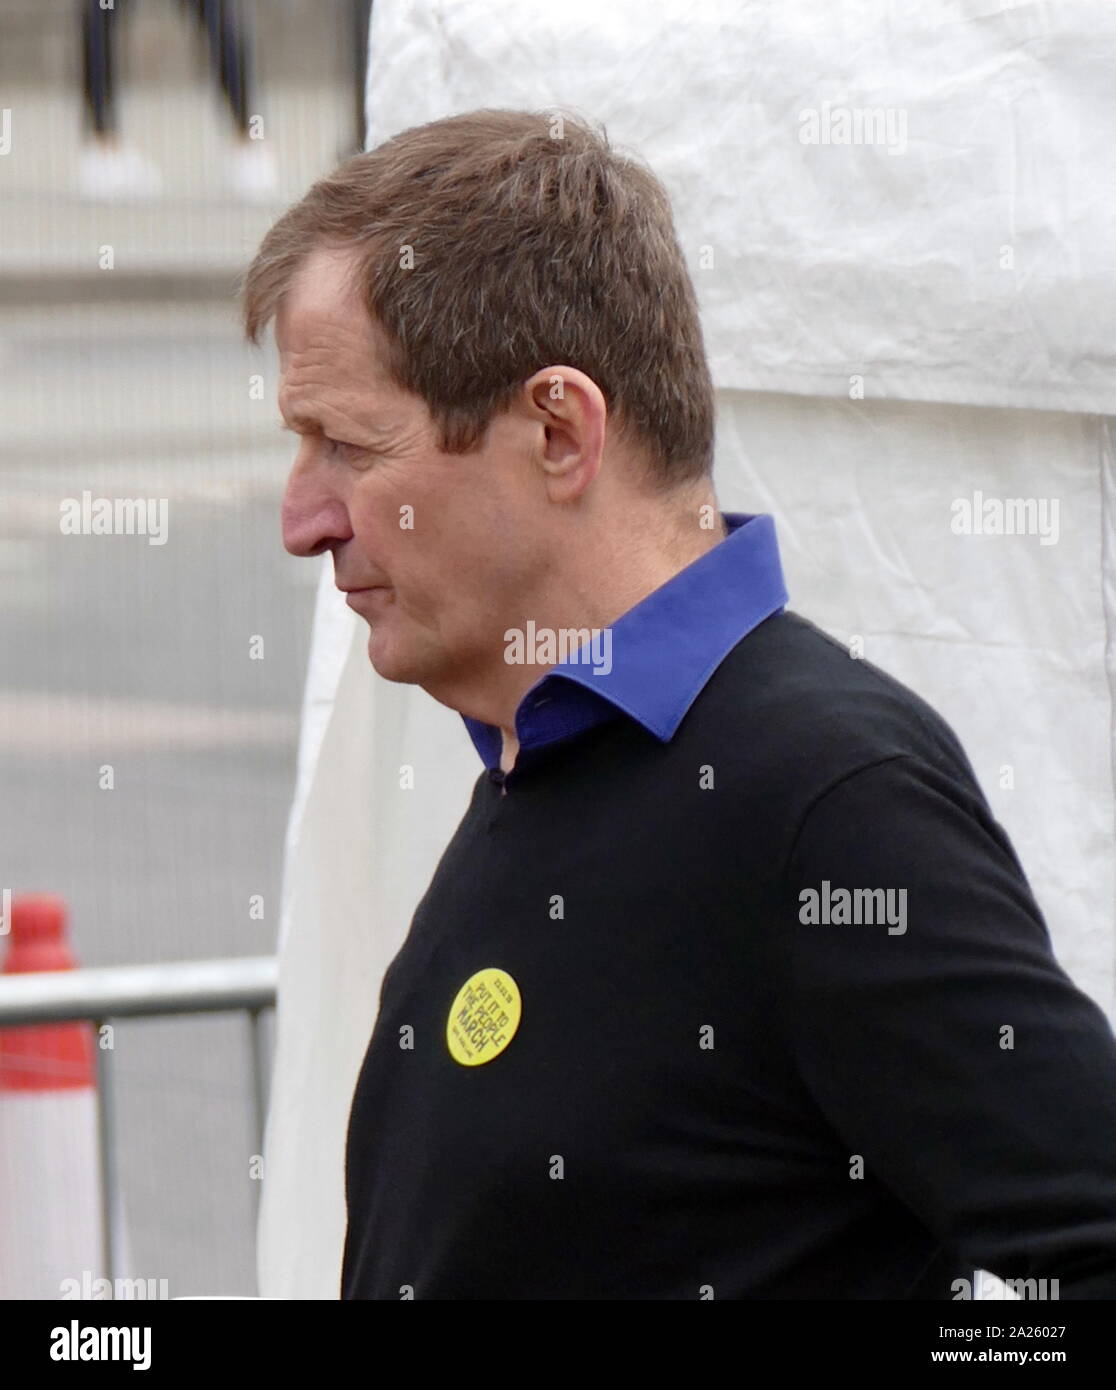 Alastair Campbell, former Labour Press consultant and spin doctor, at the 'People's Vote' march in Parliament Square, London. The People's Vote march took place in London on 23 March 2019 as part of a series of demonstrations to protest against Brexit, call for a new referendum, and ask the British Government to revoke Article 50. It brought to the capital hundreds of thousands of protestors, or over a million people according to the organizers. Stock Photo